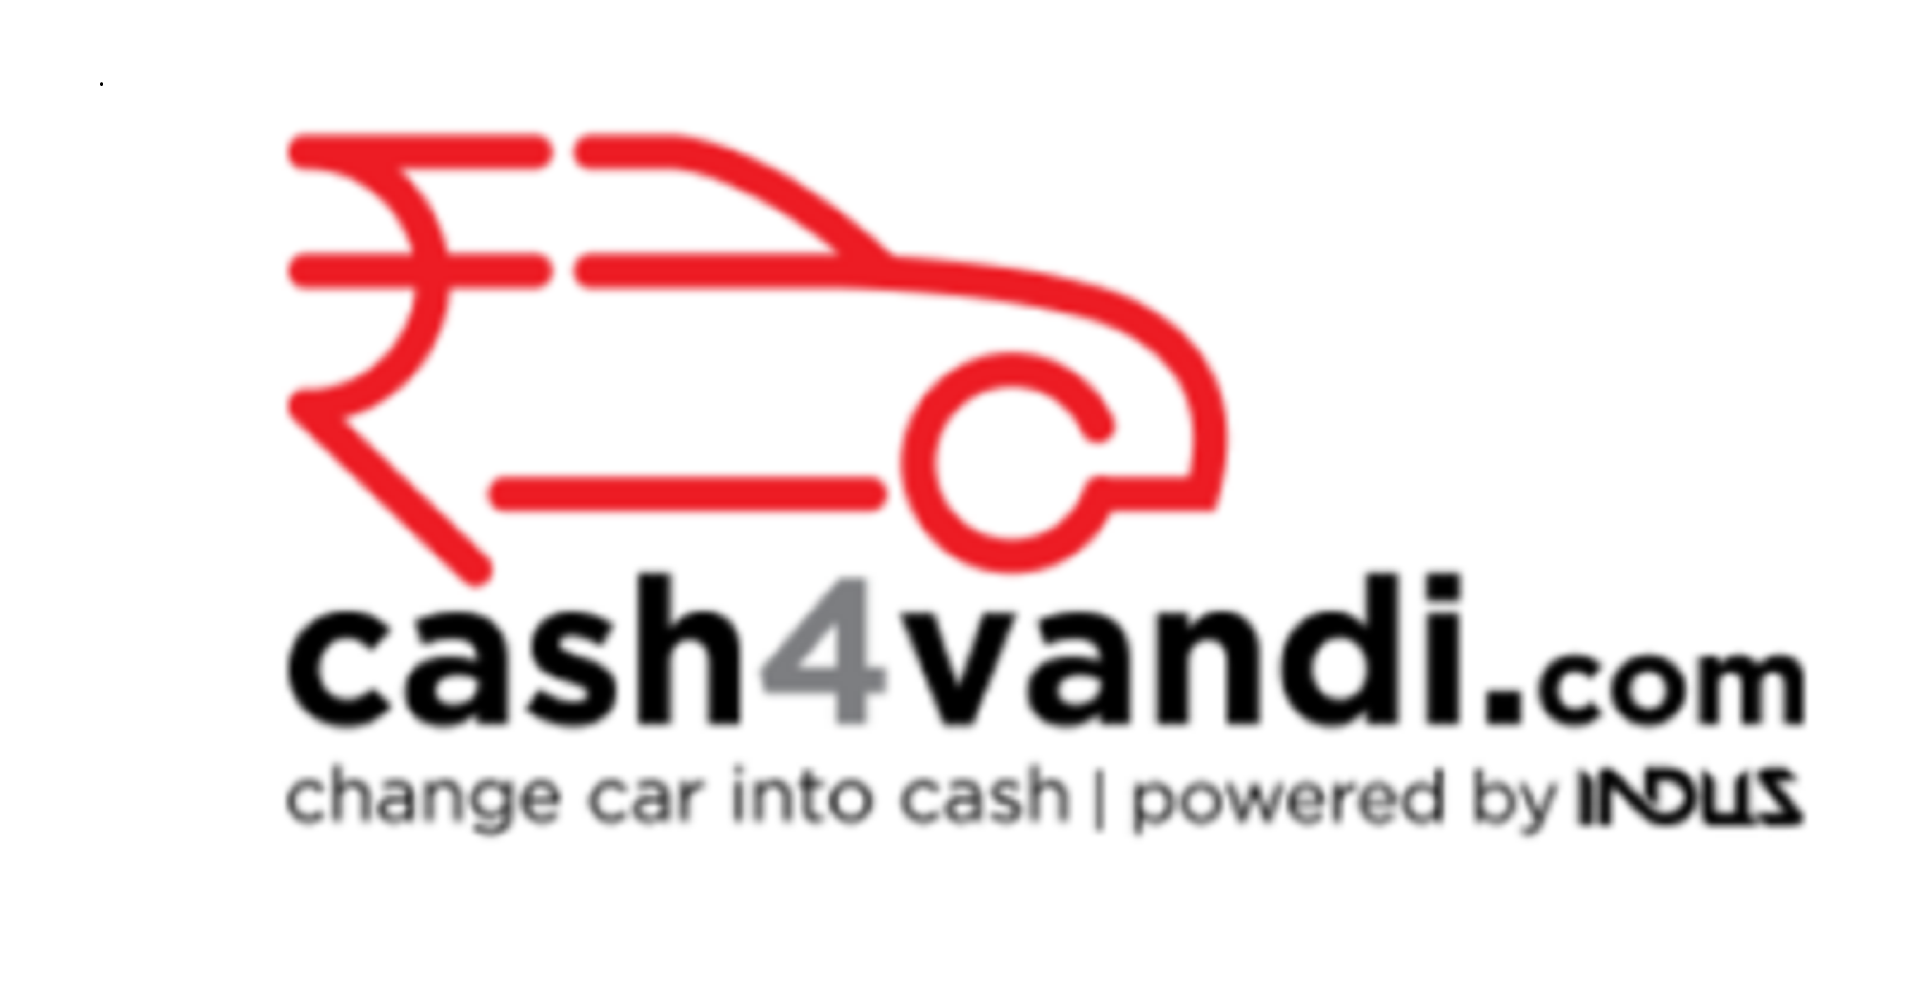 Sell your Used Car Online in Kerala | Cash4Vandi - Other